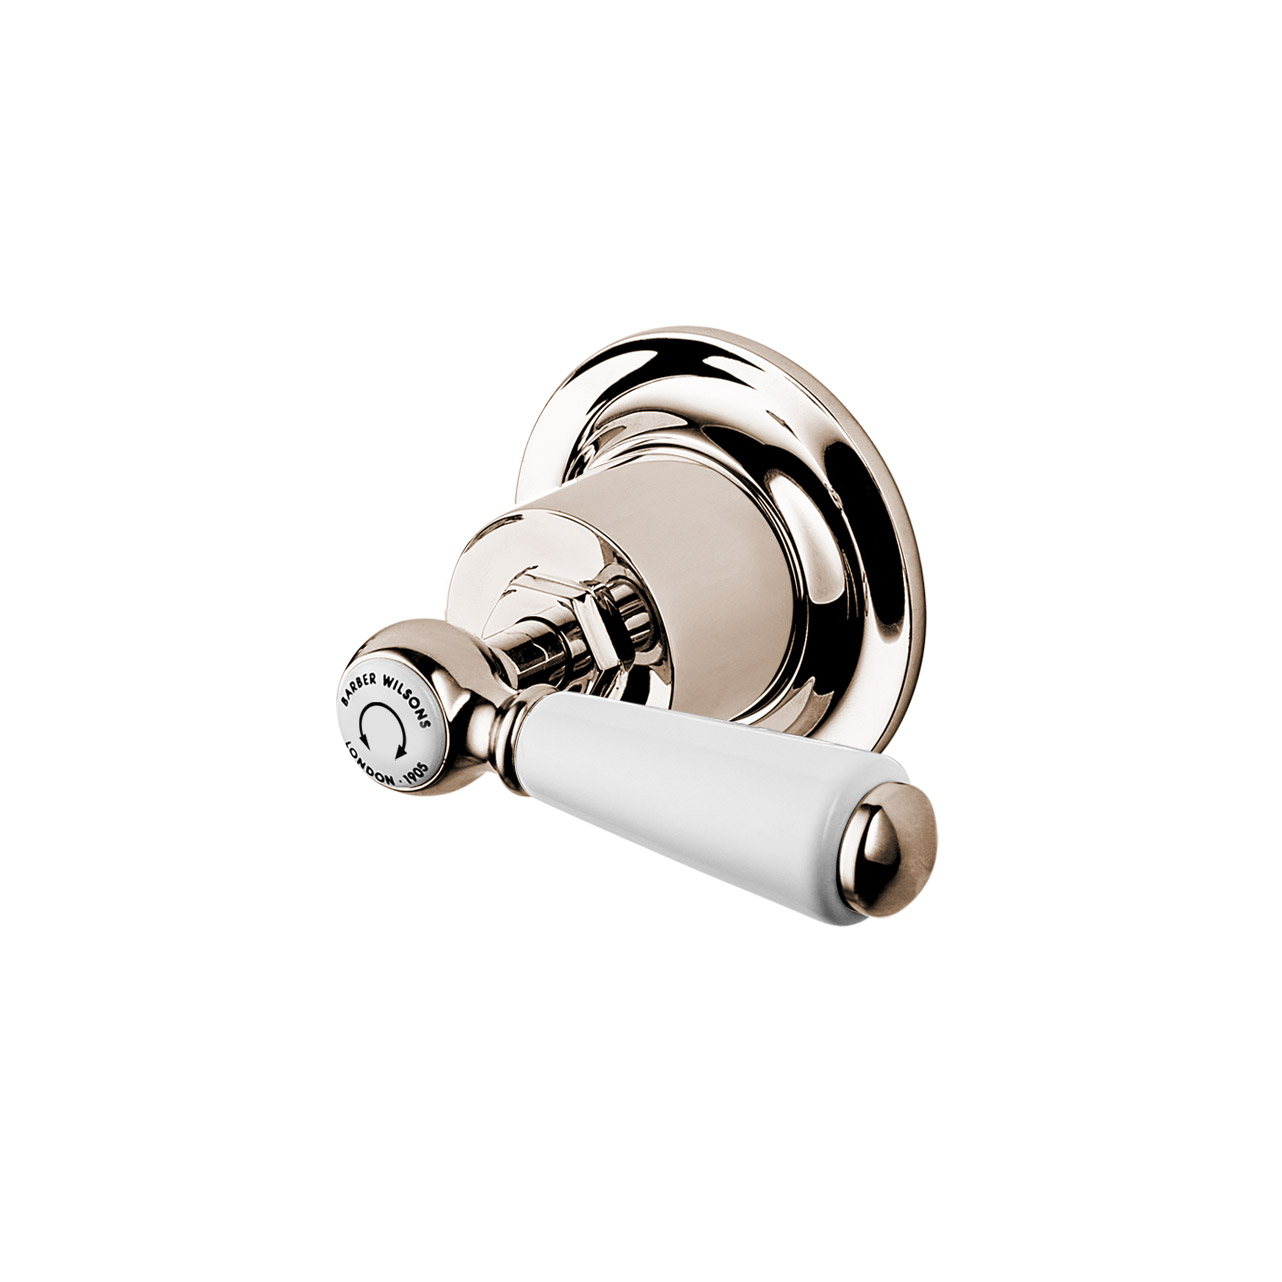 Bath two way diverter with china lever on a rounded mounting flange